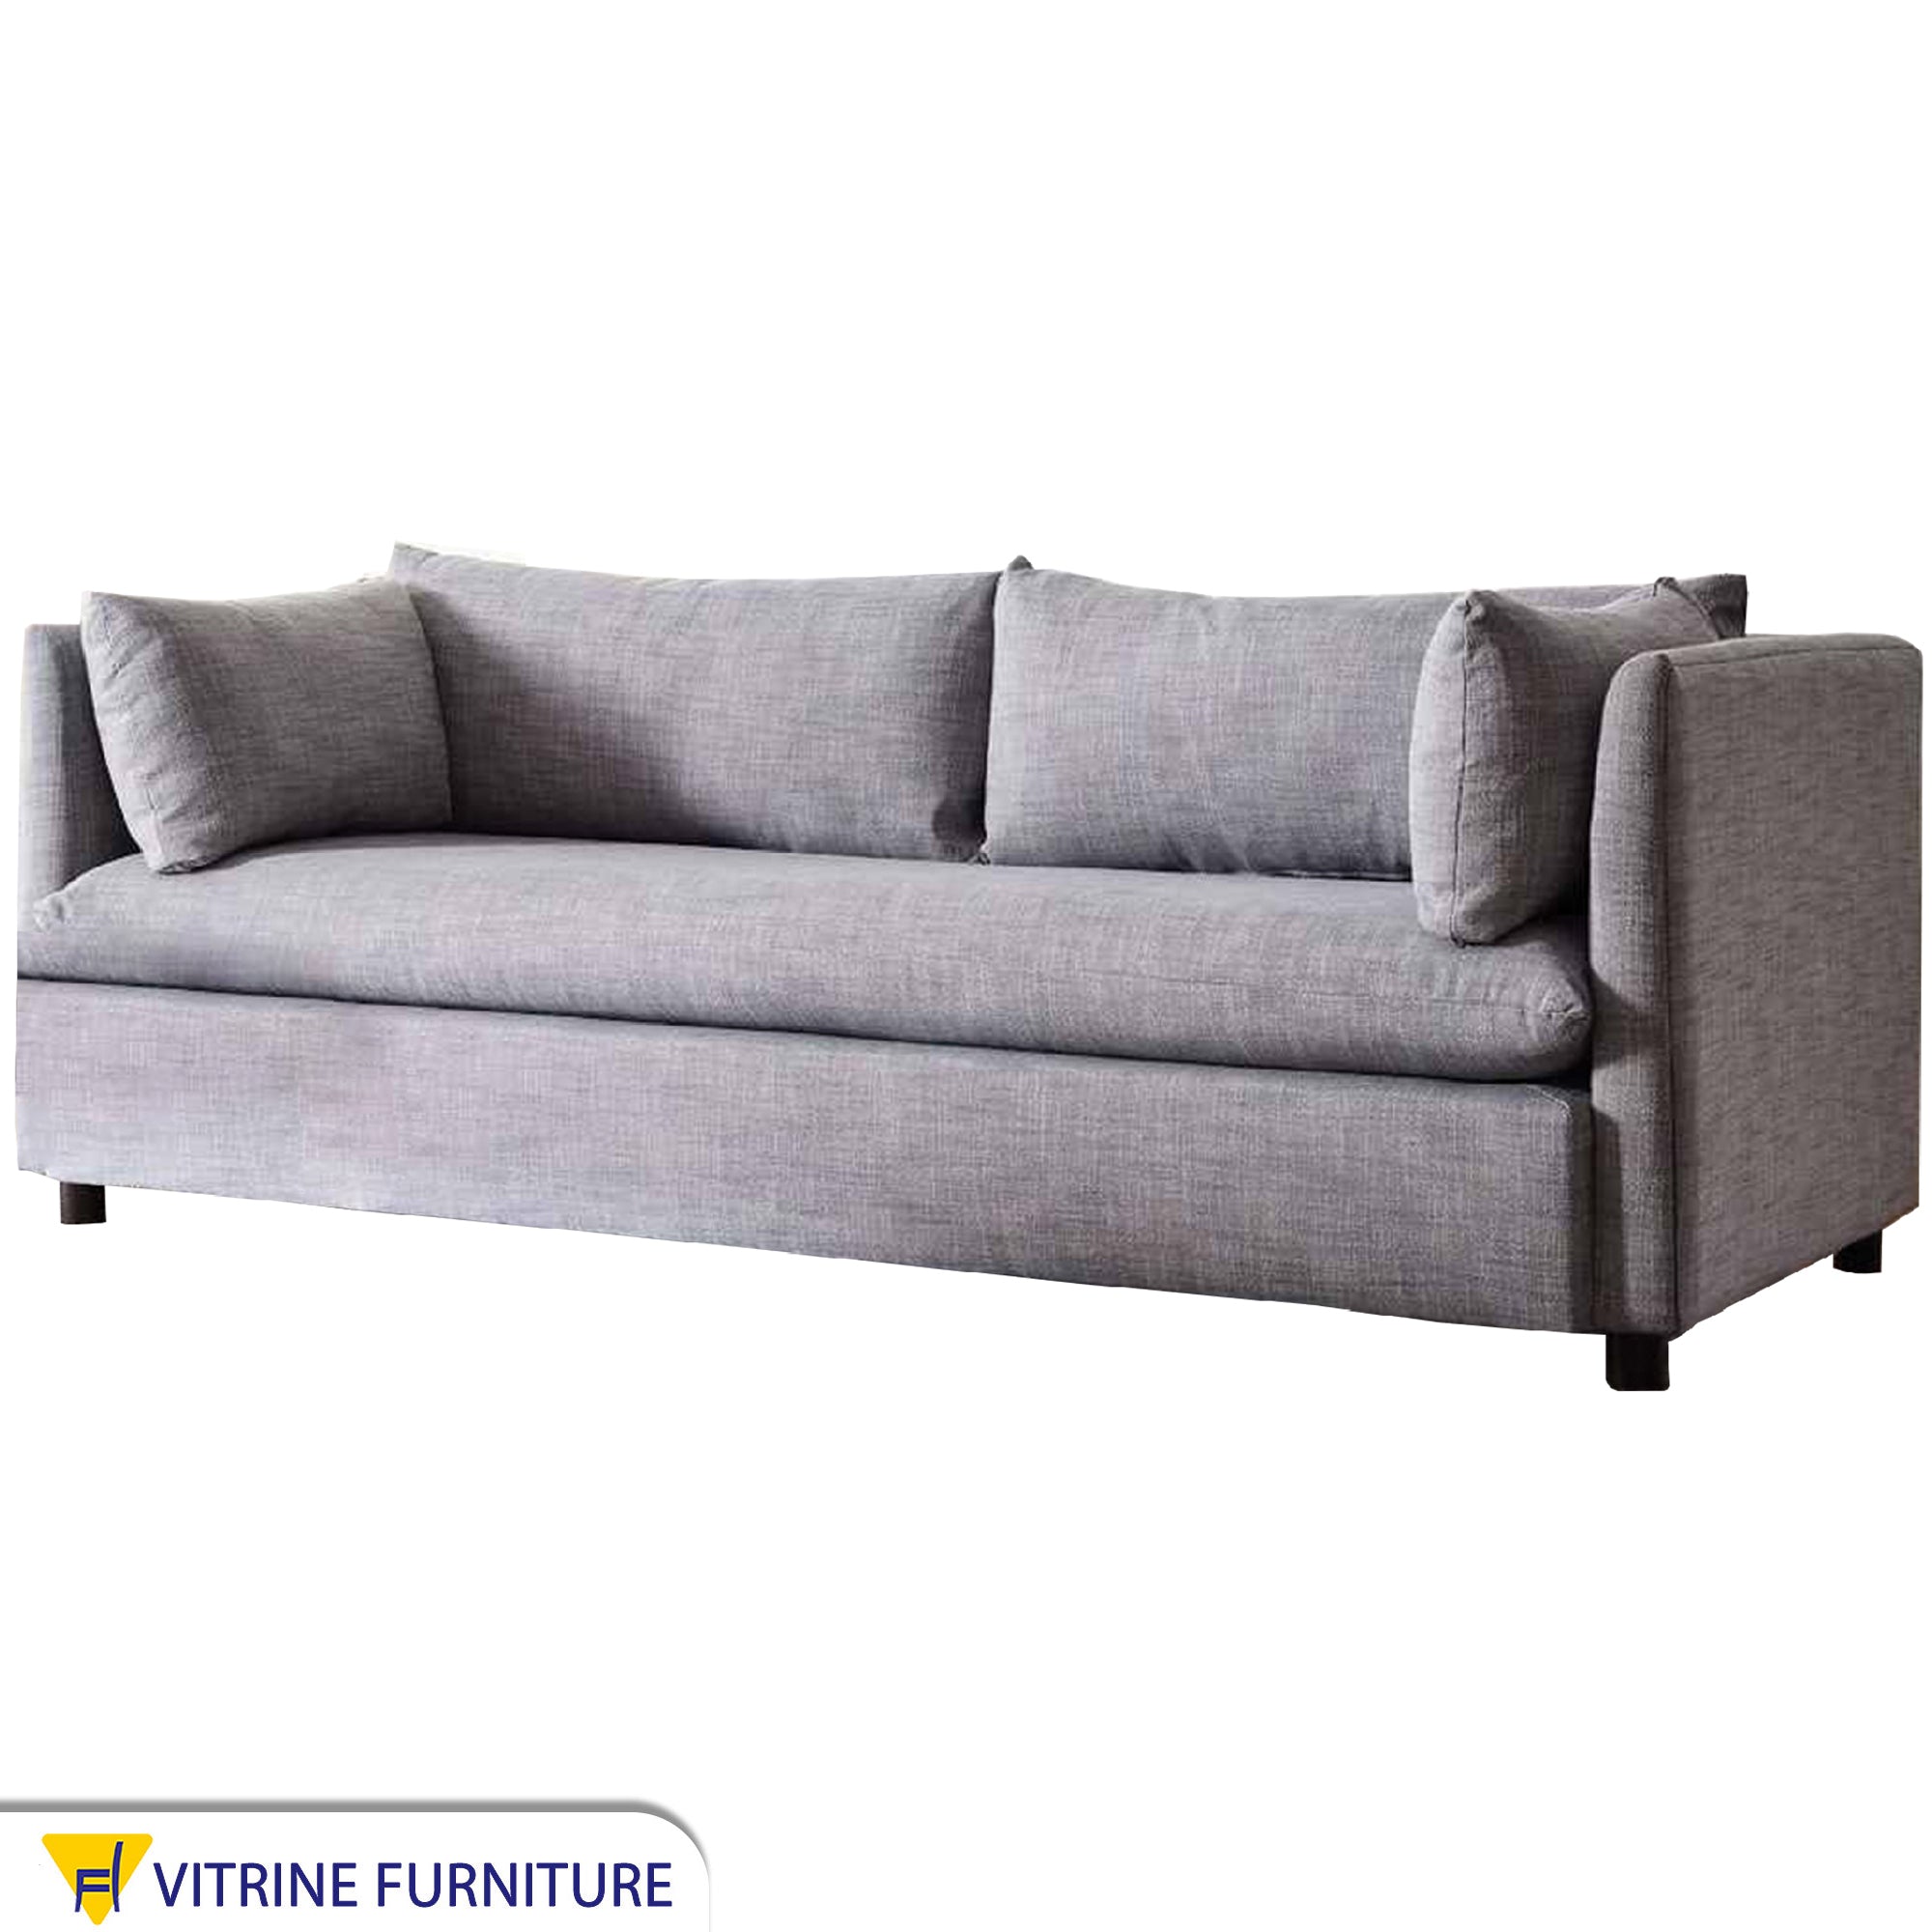 A sofa with movable back cushions